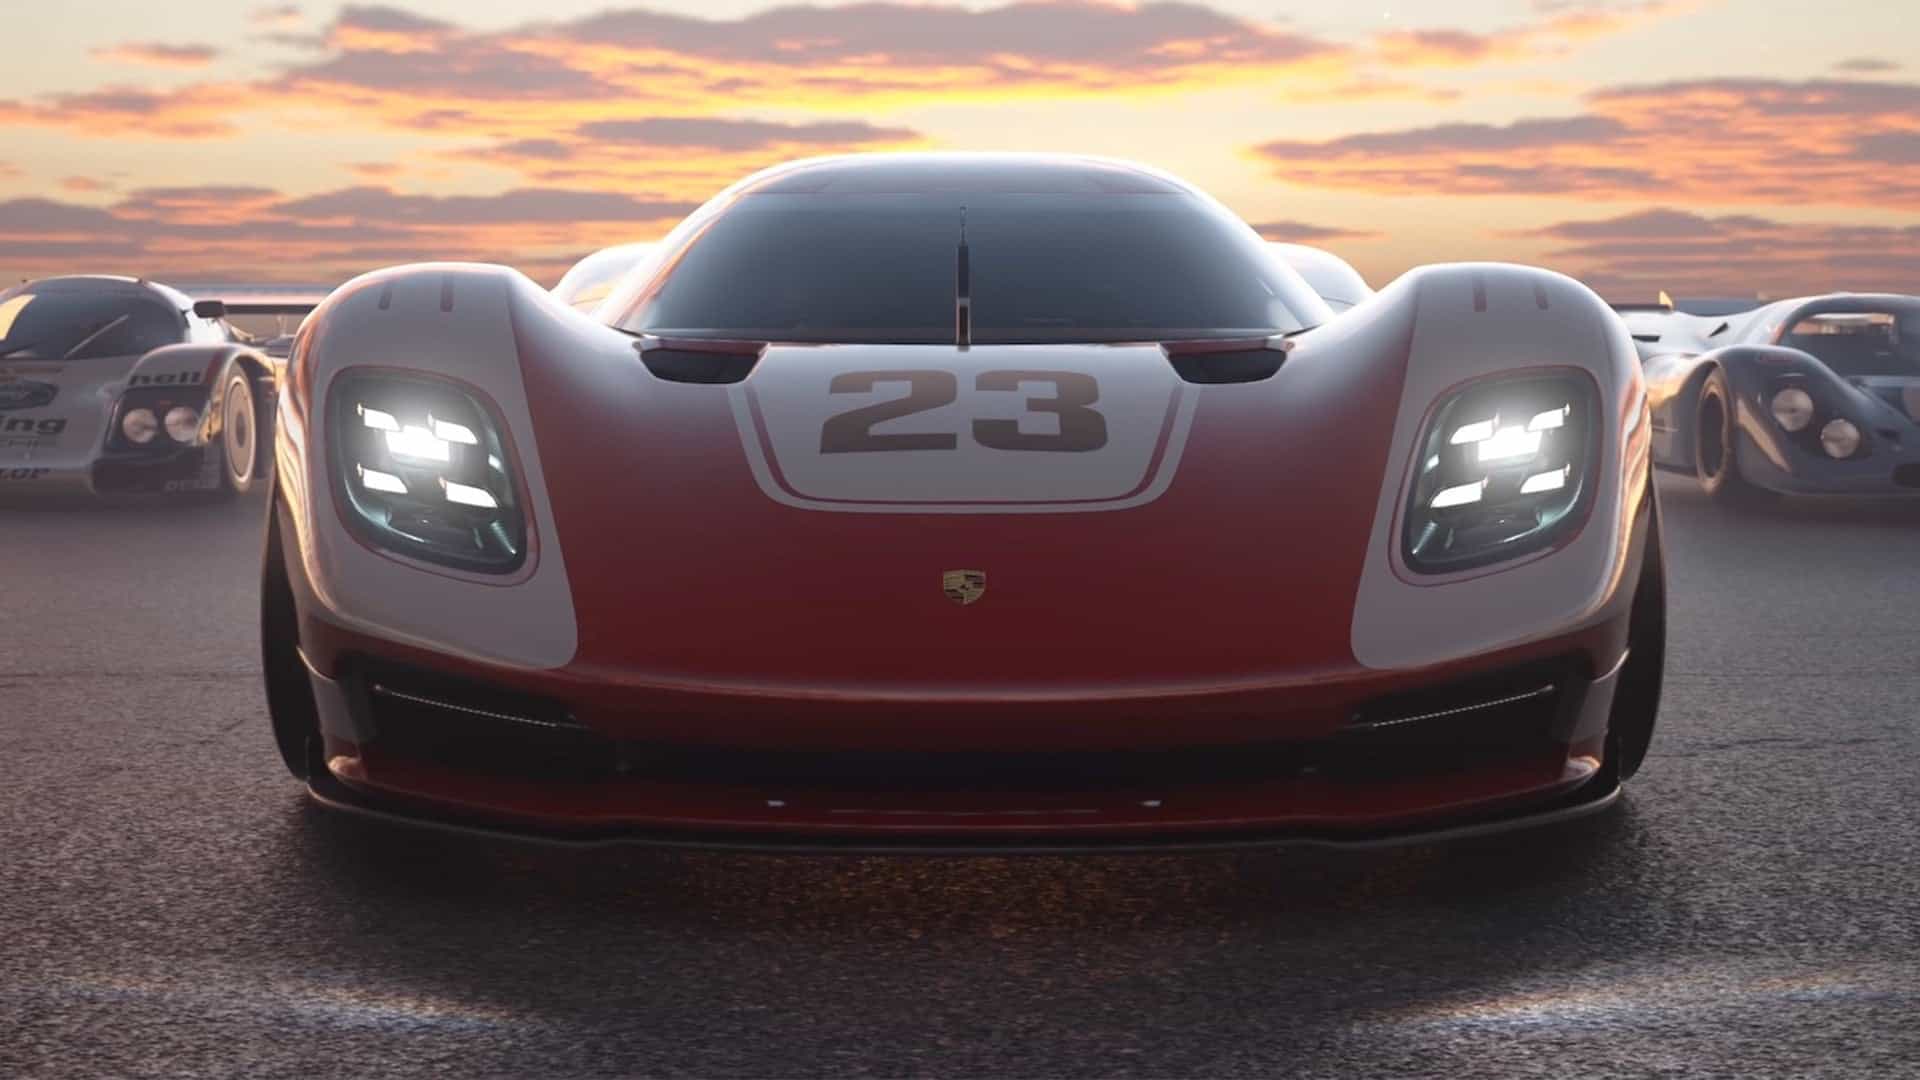 Gran Turismo 7 release date and the difference between the PS4 and